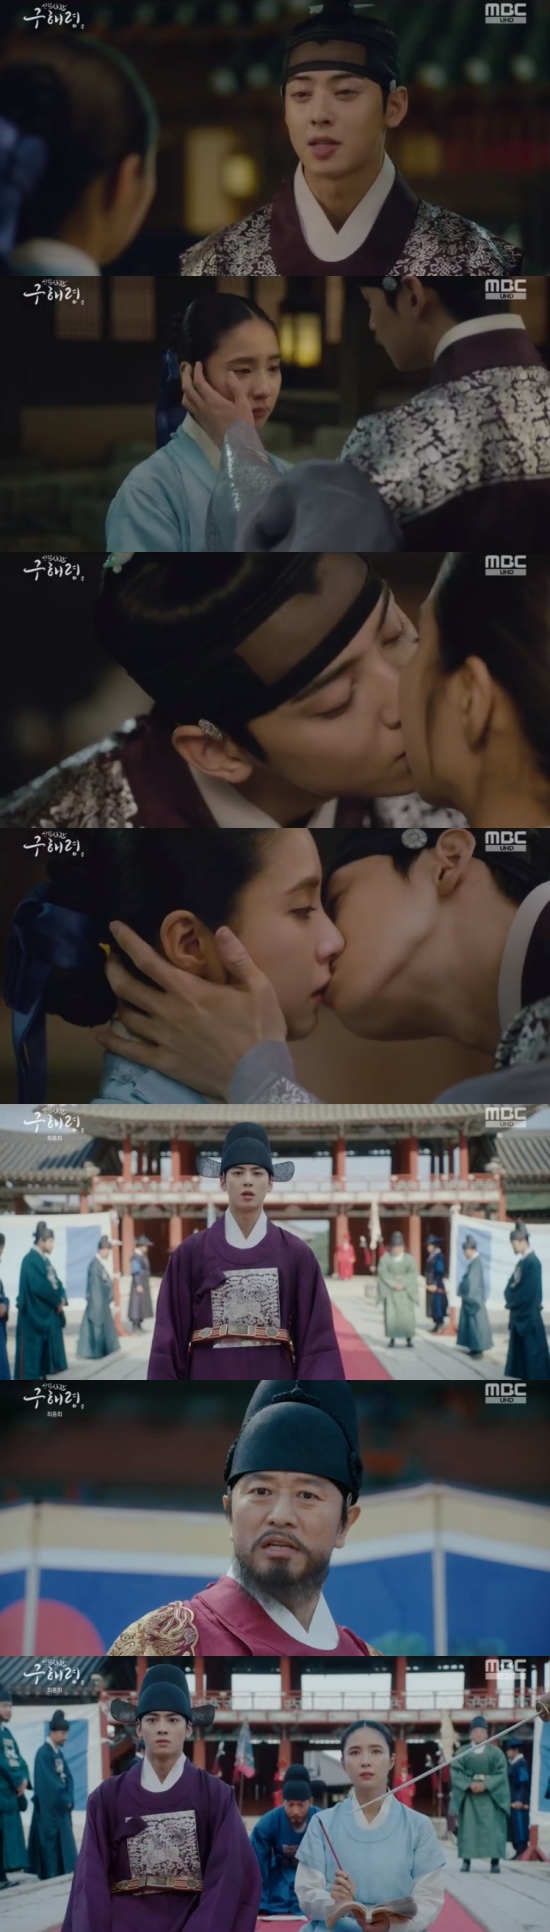 Newcomer Rookie Historian Goo Hae-ryung Cha Eun-woo and Shin Se-kyung reveal the truth and complete Happy EndingsIn the 39th and 40th MBC drama The New Entrepreneur Rookie Historian Goe-ryung broadcasted on the 26th, Lee Rim (Cha Eun-woo) Rookie Historian Goo Hae-ryung (Shin Se-kyung) were portrayed as revealing the truth and keeping love.Lee Jin (Park Ki-woong) turned away from Lee Rims request to open the Chuguk office and ordered the closure of the Green Seodang.Eventually Rookie Historian Goo Hae-ryung fled with Irim from the Green West Party, and headed to Mohwa (Jeon Ik-ryong).Irim talked to Mohwa and listened to details of what had happened in the past.Lee also told Rookie Historian Goo Hae-ryung, What happens to me after tomorrow, do not move because you do not know.Even if I leave, there should be a place to write. Rookie Historian Goo Hae-ryung said, You dont have to.Ill be with Mama wherever she is, and I cant live like that without being alone again and having a place to rest.I will be with Mama, he confessed, and Irim said, No, you will live your life. I realized when I saw you standing in the yard the day I came out of the palace. I was not trapped in the melted hall.My whole life was a time to wait for you to come to me. So its okay.I can change my name and live here and there, but I can endure it if I think that I am waiting for the day I meet you someday. He approached Rookie Historian Goo Hae-ryung and kissed him.Lee Lim later told Lee Tae (Kim Min-sang): I am no longer a Dawon, Irim, the son of Yi-Gyeong, who has been able to kill me for the past 20 years.What is the reason why you did not do that? Because of the guilt that you killed your innocent brother and took Wang Yu, you have saved me, the enemy of the lungs, all this time.The officers stop the brush, and the officer who does not retreat will be thirsty here, Lee said.But Rookie Historian Goo Hae-ryung stood side by side with Irim, saying: Even if you beat me, the essay will not stop.Another officer will come and sit here where I died, and if you kill him, another officer will come and sit down.You can never stop him from killing all the officers of this land and taking all the paper and brushes from his mouth to his pupil to his child.Thats what its going to be said. Thats the power of truth, he said.Other officers also supported Irim and Rookie Historian Goo Hae-ryung, while Lee Jin said: True loyalists do not block the eyes and ears of the king.You still dont know. The kings country and the people are left, and the kings harm is left. Dowon and his men.If there are those who have been framed, restore their identity and punish those who have sinned, please open the Chukkuk Office and correct all the things that happened in the year. In the end, Itae acknowledged his mistake and the Chukkuk government was opened.Furthermore, Irim met Dae-han Lim (Kim Yeo-jin), and said, I know that it was Mamas long-awaited desire for me to climb Wang Yu; the position is not mine.The time spent as a large army was a big time for me, and now I want to live as a normal person, not as a son of anyone. Three years passed, and Rookie Historian Goo Hae-ryung was still working as a cadet at the presbytery.In the meantime, Irim came out of the palace and lived a free life. After a long time, he returned to Hanyang and ran to the house of Rookie Historian Goo Hae-ryung.Lee and Rookie Historian Goo Hae-ryung spent the night together, and first I woke up to wake Rookie Historian Goo Hae-ryung in a hurry to wake up.Rookie Historian Goo Hae-ryung kissed Lee before breaking up with Lee, and smiled, I think today will be a day.In particular, Lee Lim and Rookie Historian Goo Hae-ryung revealed the truth about the death of Lee Kyum (Yoon Jong-hoon) in the past, corrected the past, and painted Happy Endings by growing love.Photo = MBC Broadcasting Screen